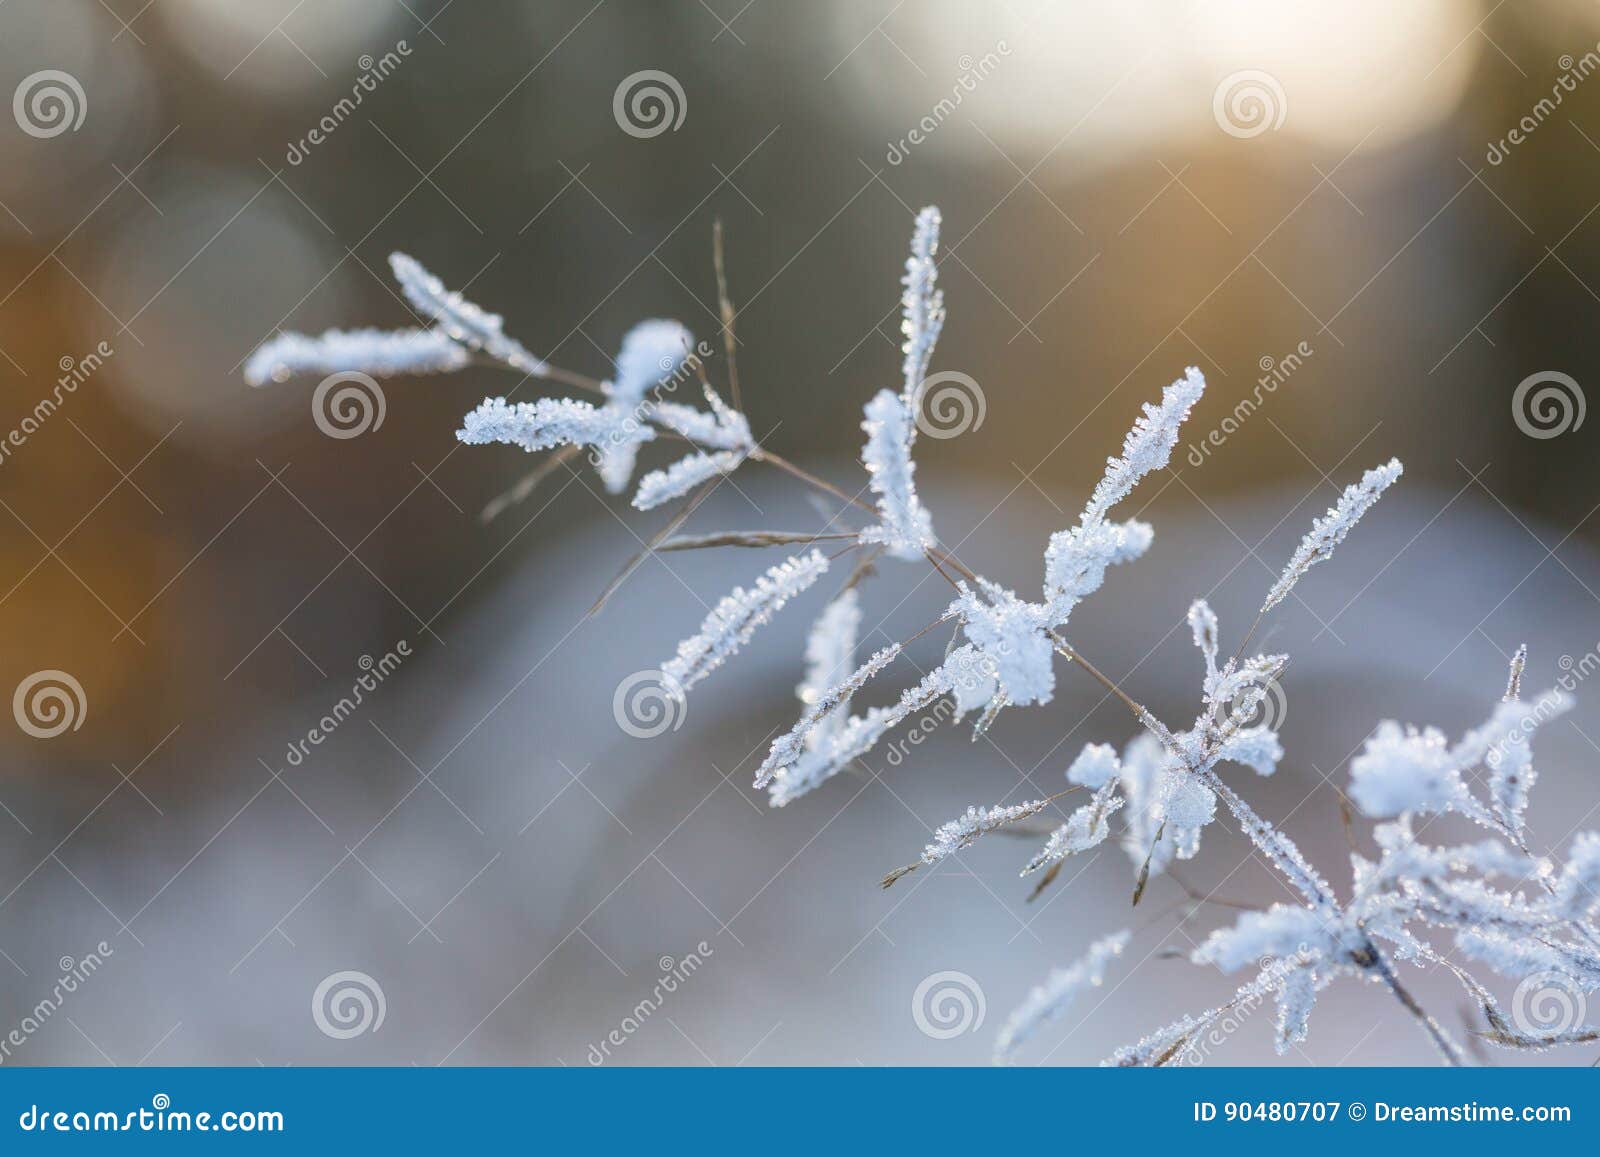 Icy Flower stock image. Image of blossom, iceflowers - 90480707